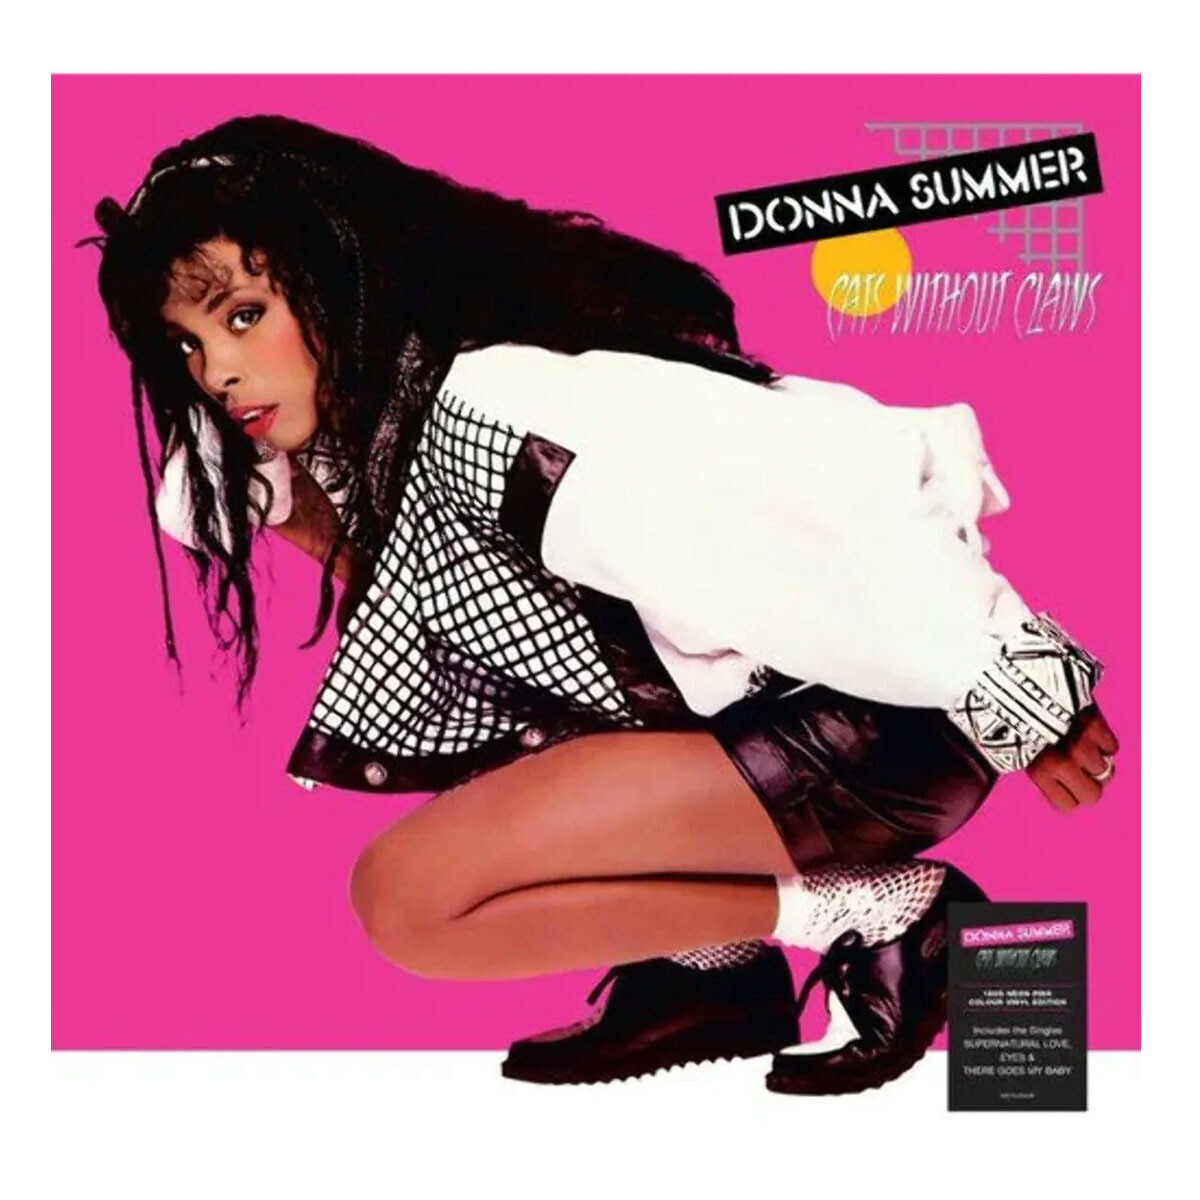 Donna Summercats Without Clawslp 